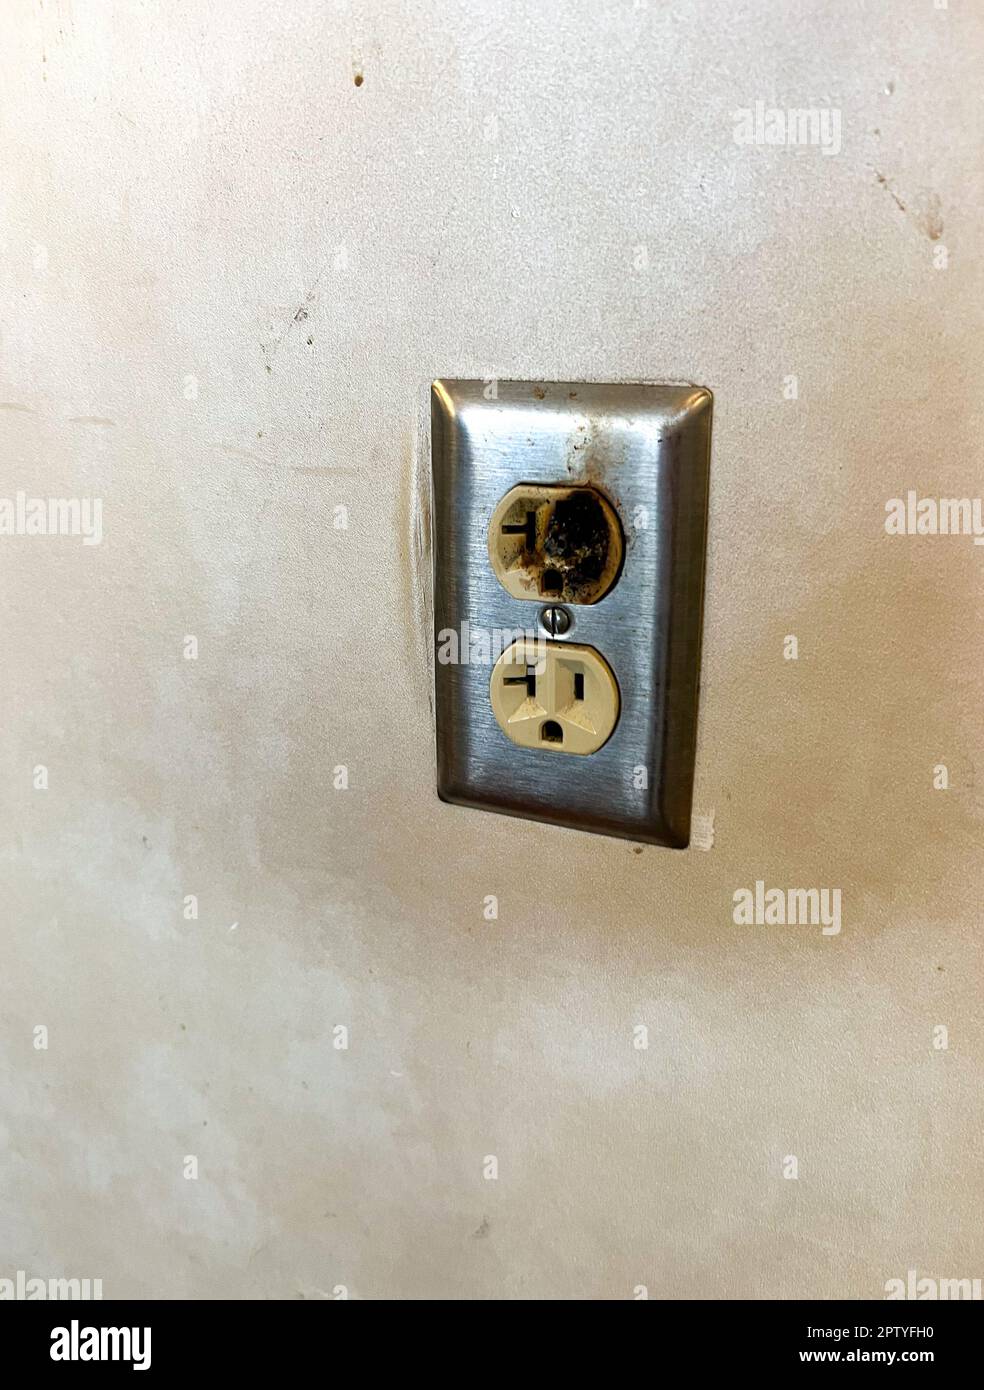 Damaged faulty electrical outlet on wall presented a hazard Stock Photo